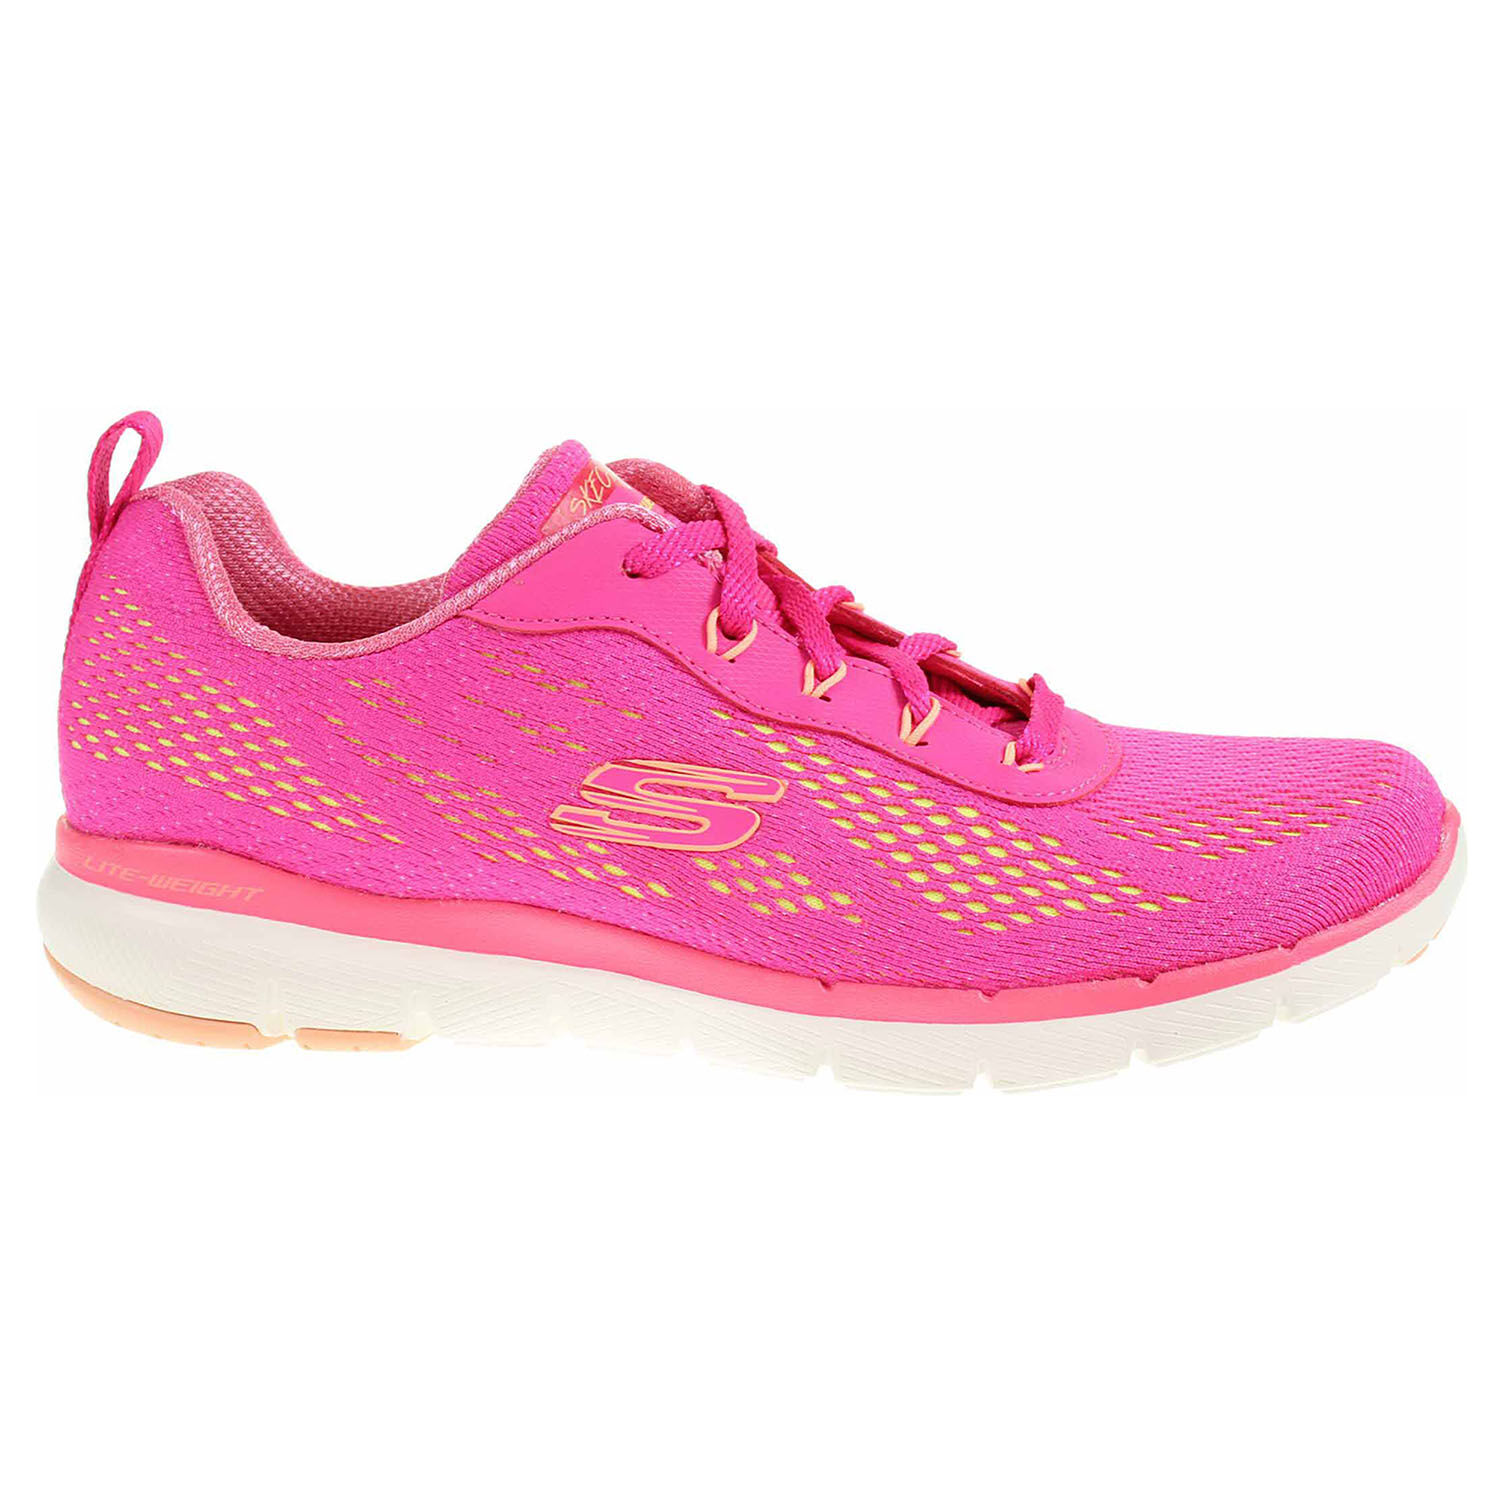 Skechers Flex Appeal 3.0 - Pure Velocity hot pink-yellow 40